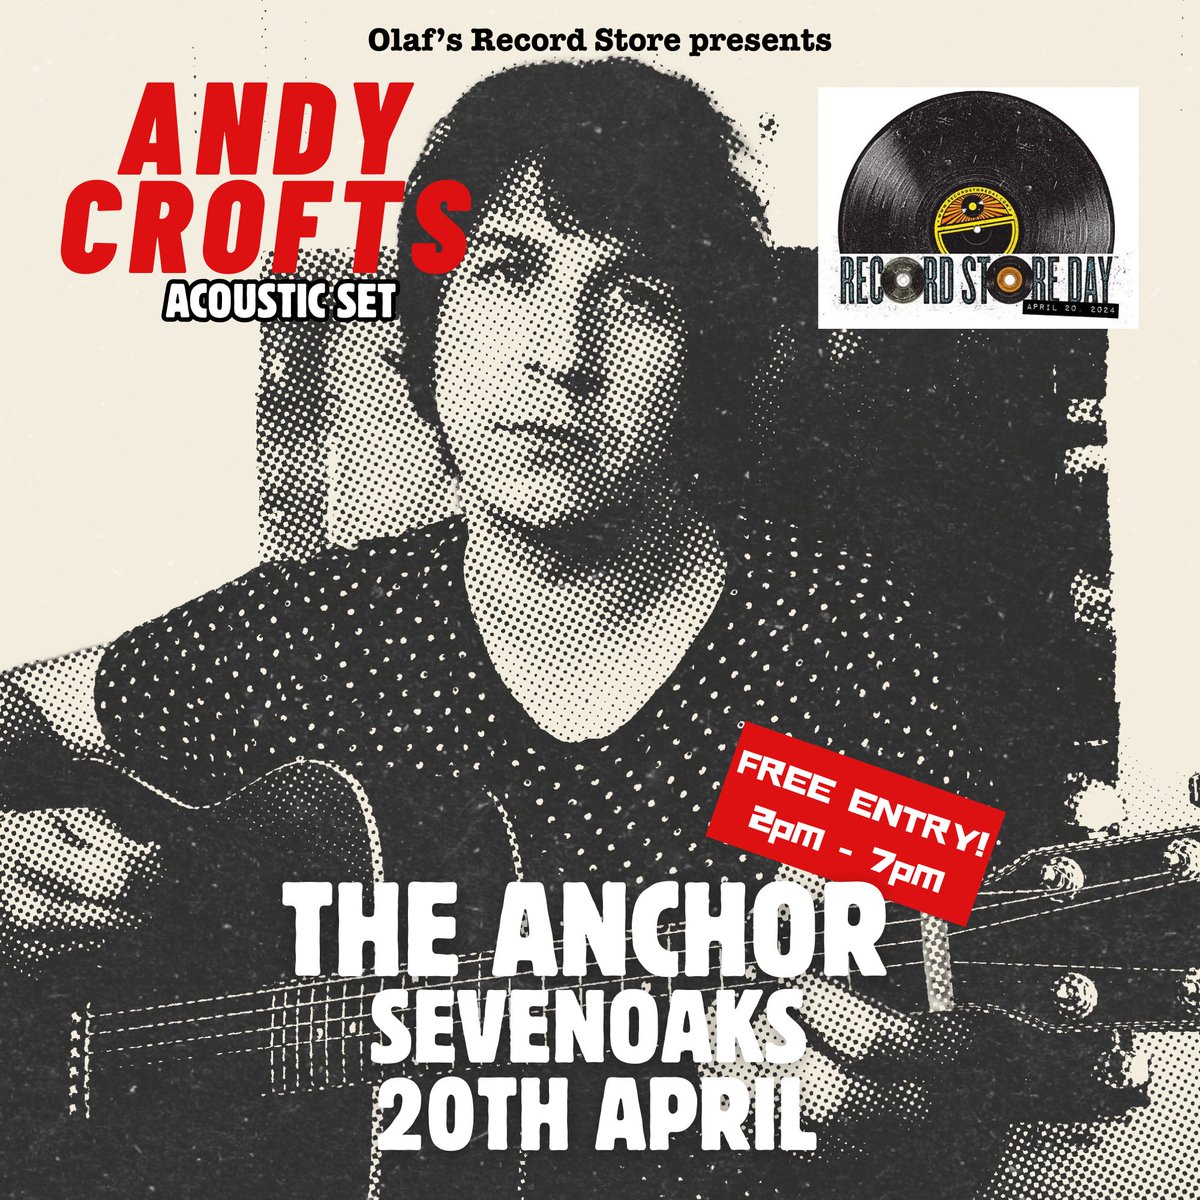 This Saturday 20th April (Record store day) I will be playing a FREE acoustic show for @OlafsRecordStor at The Anchor in Sevenoaks. There will be live music all day. I’m on at 2.50pm FREE ENTRY. Come say hello x